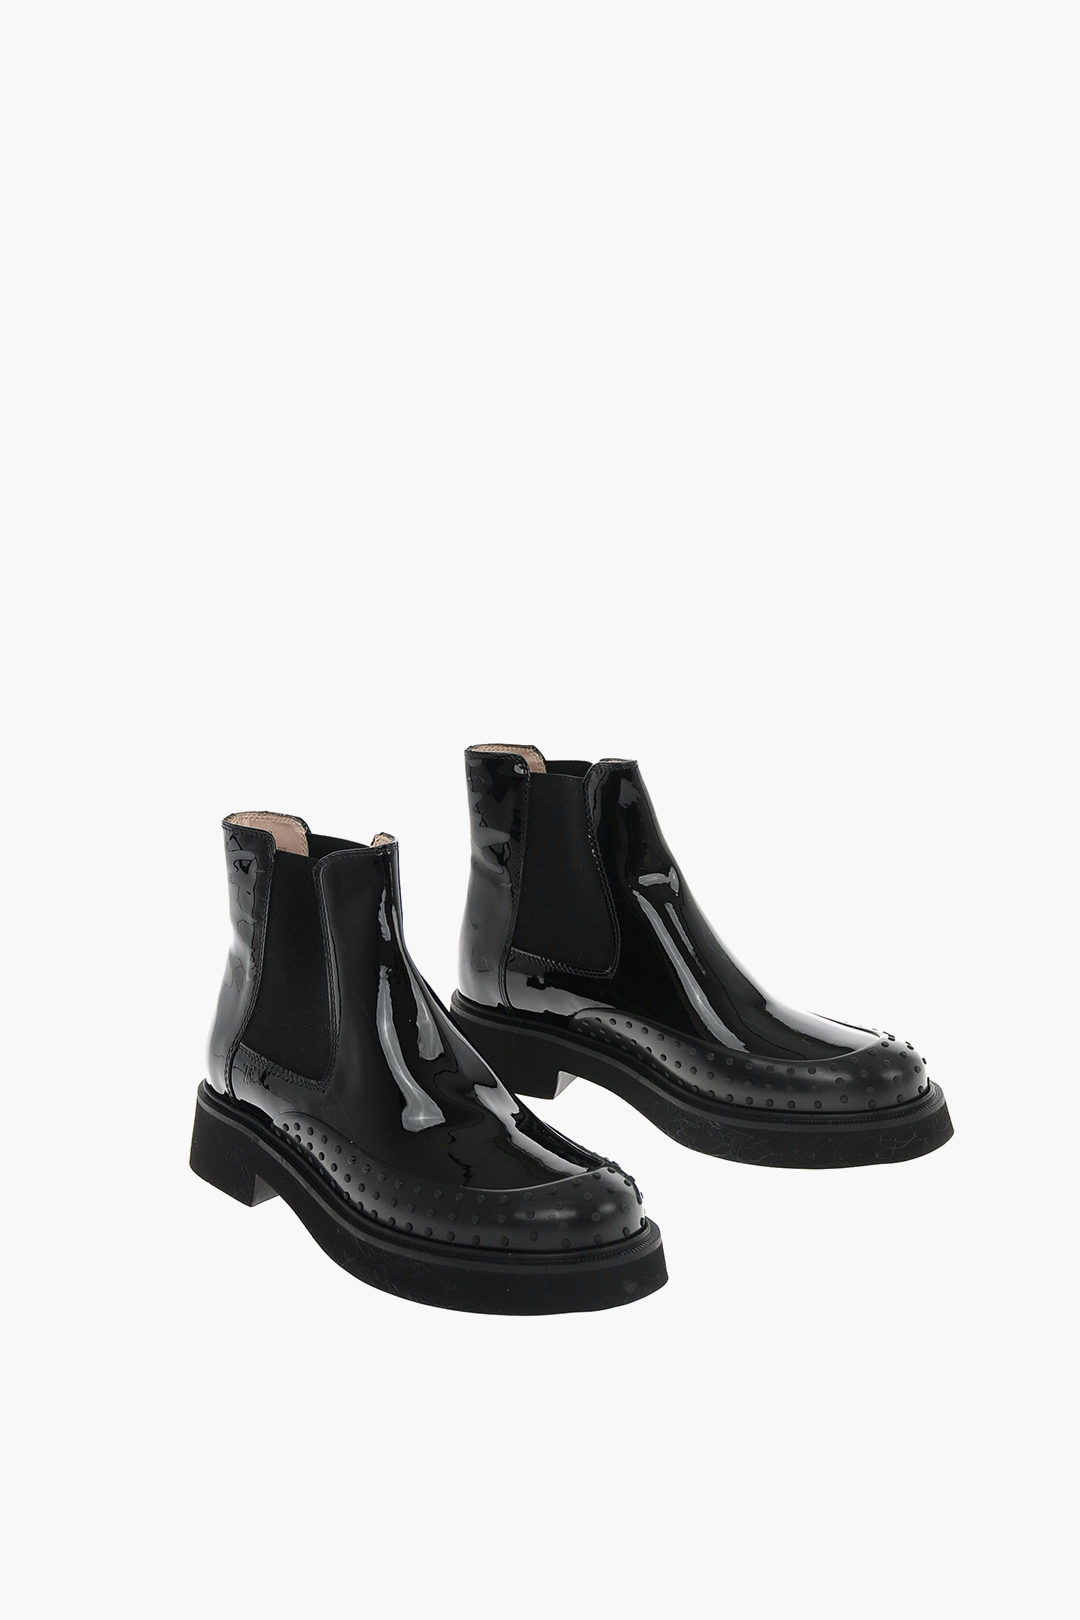 Caius dialekt Enhed Tod's Patent leather Chelsea boots women - Glamood Outlet